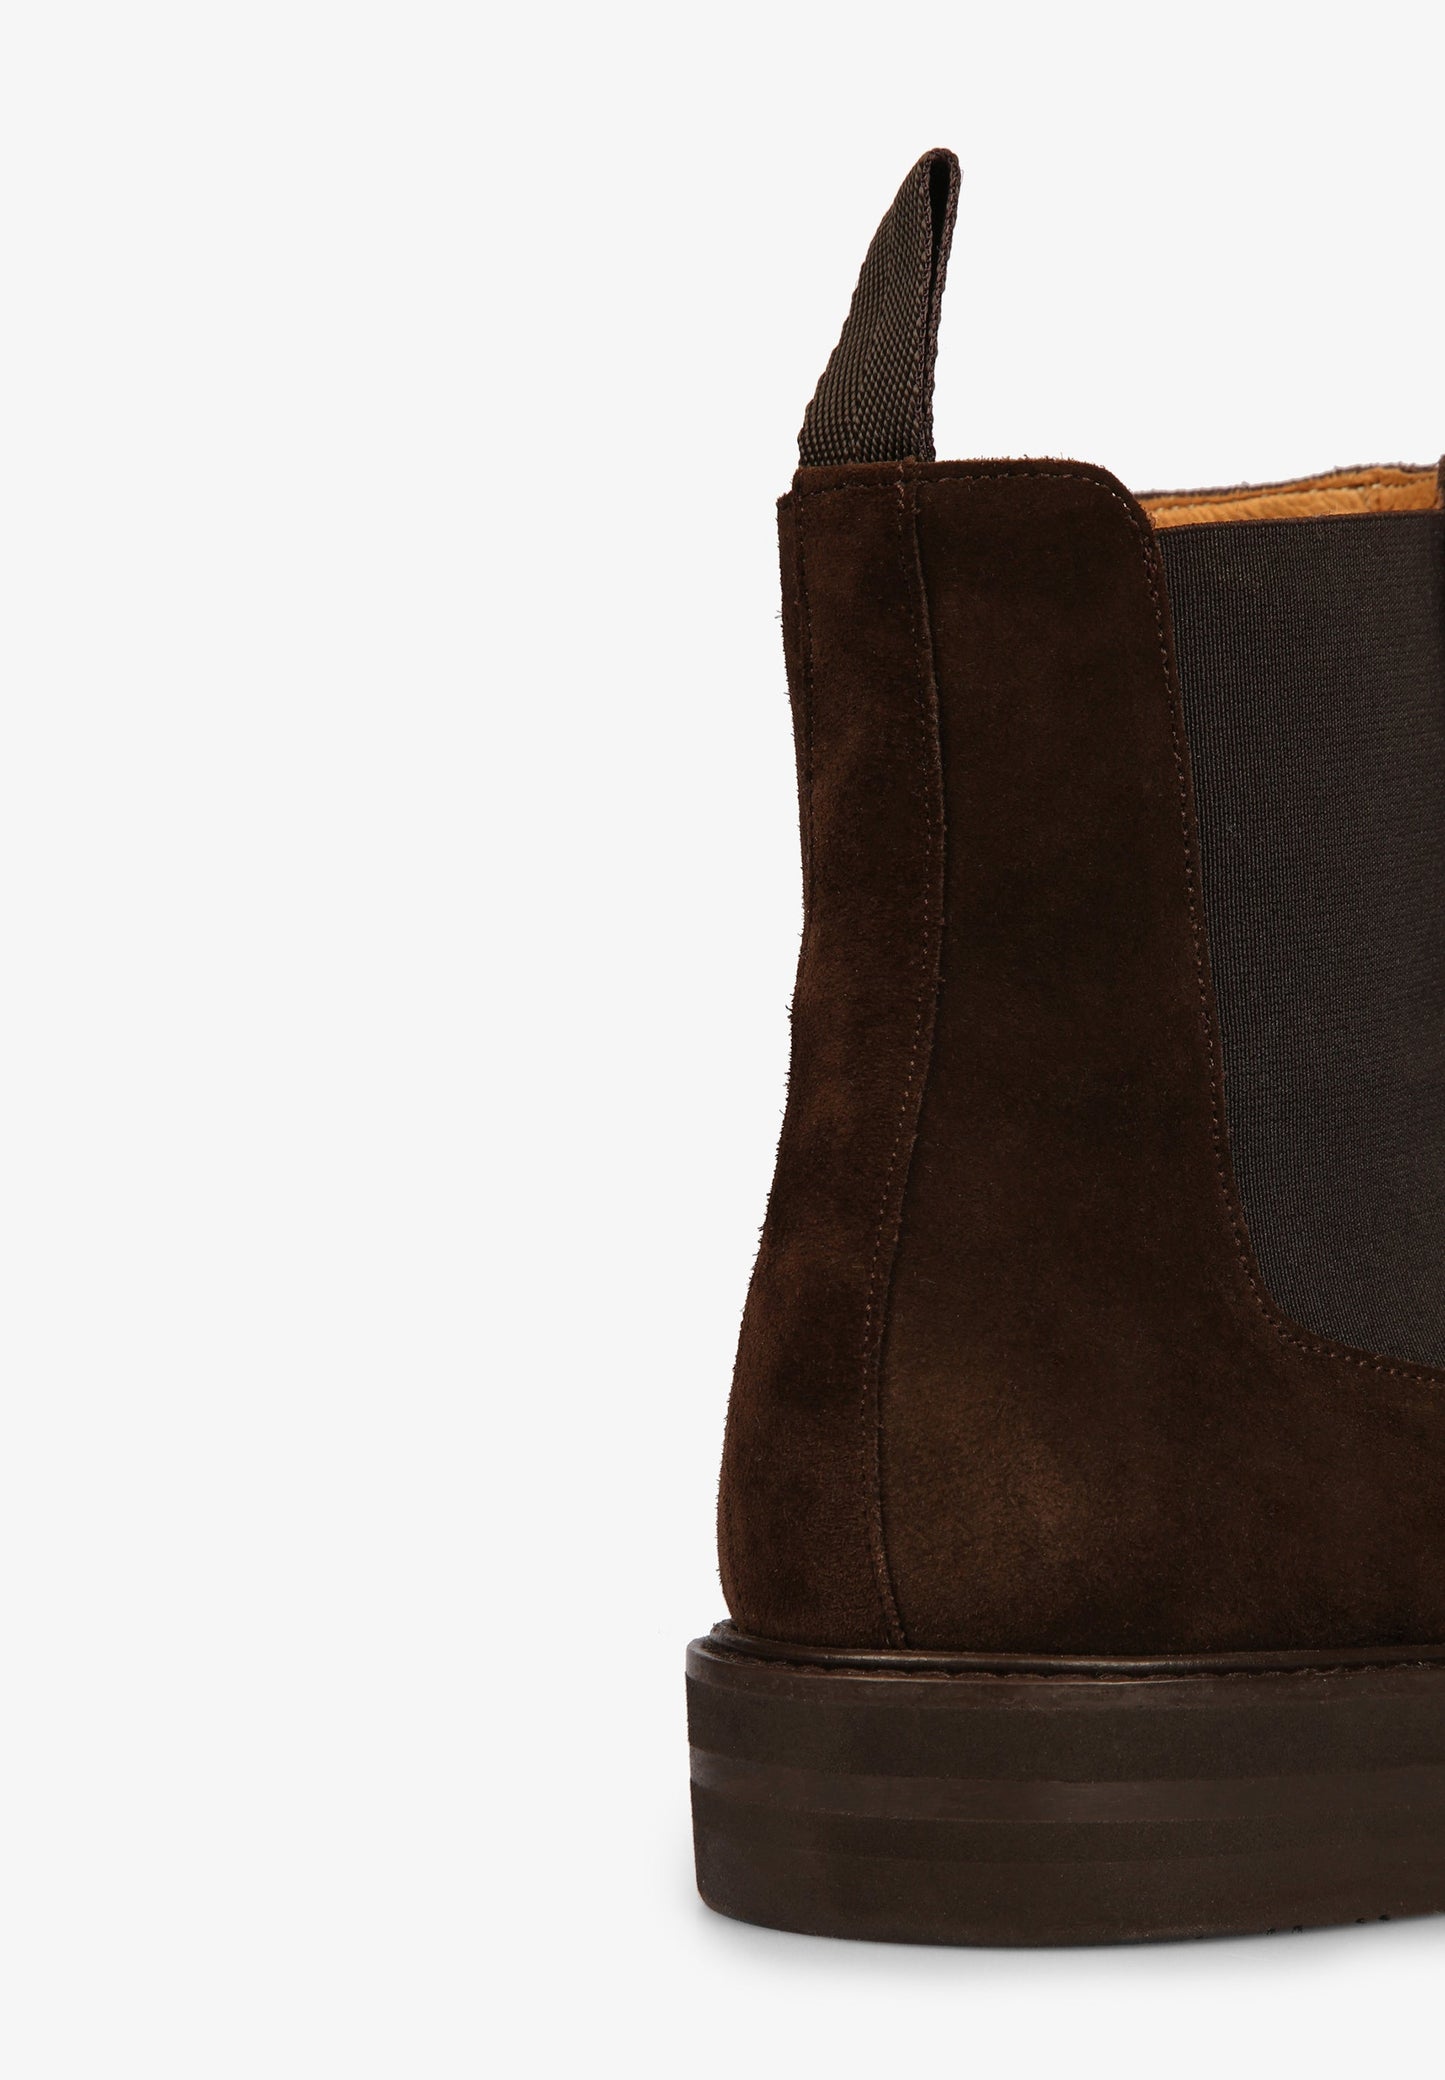 NOS CHELSEA BOOTS